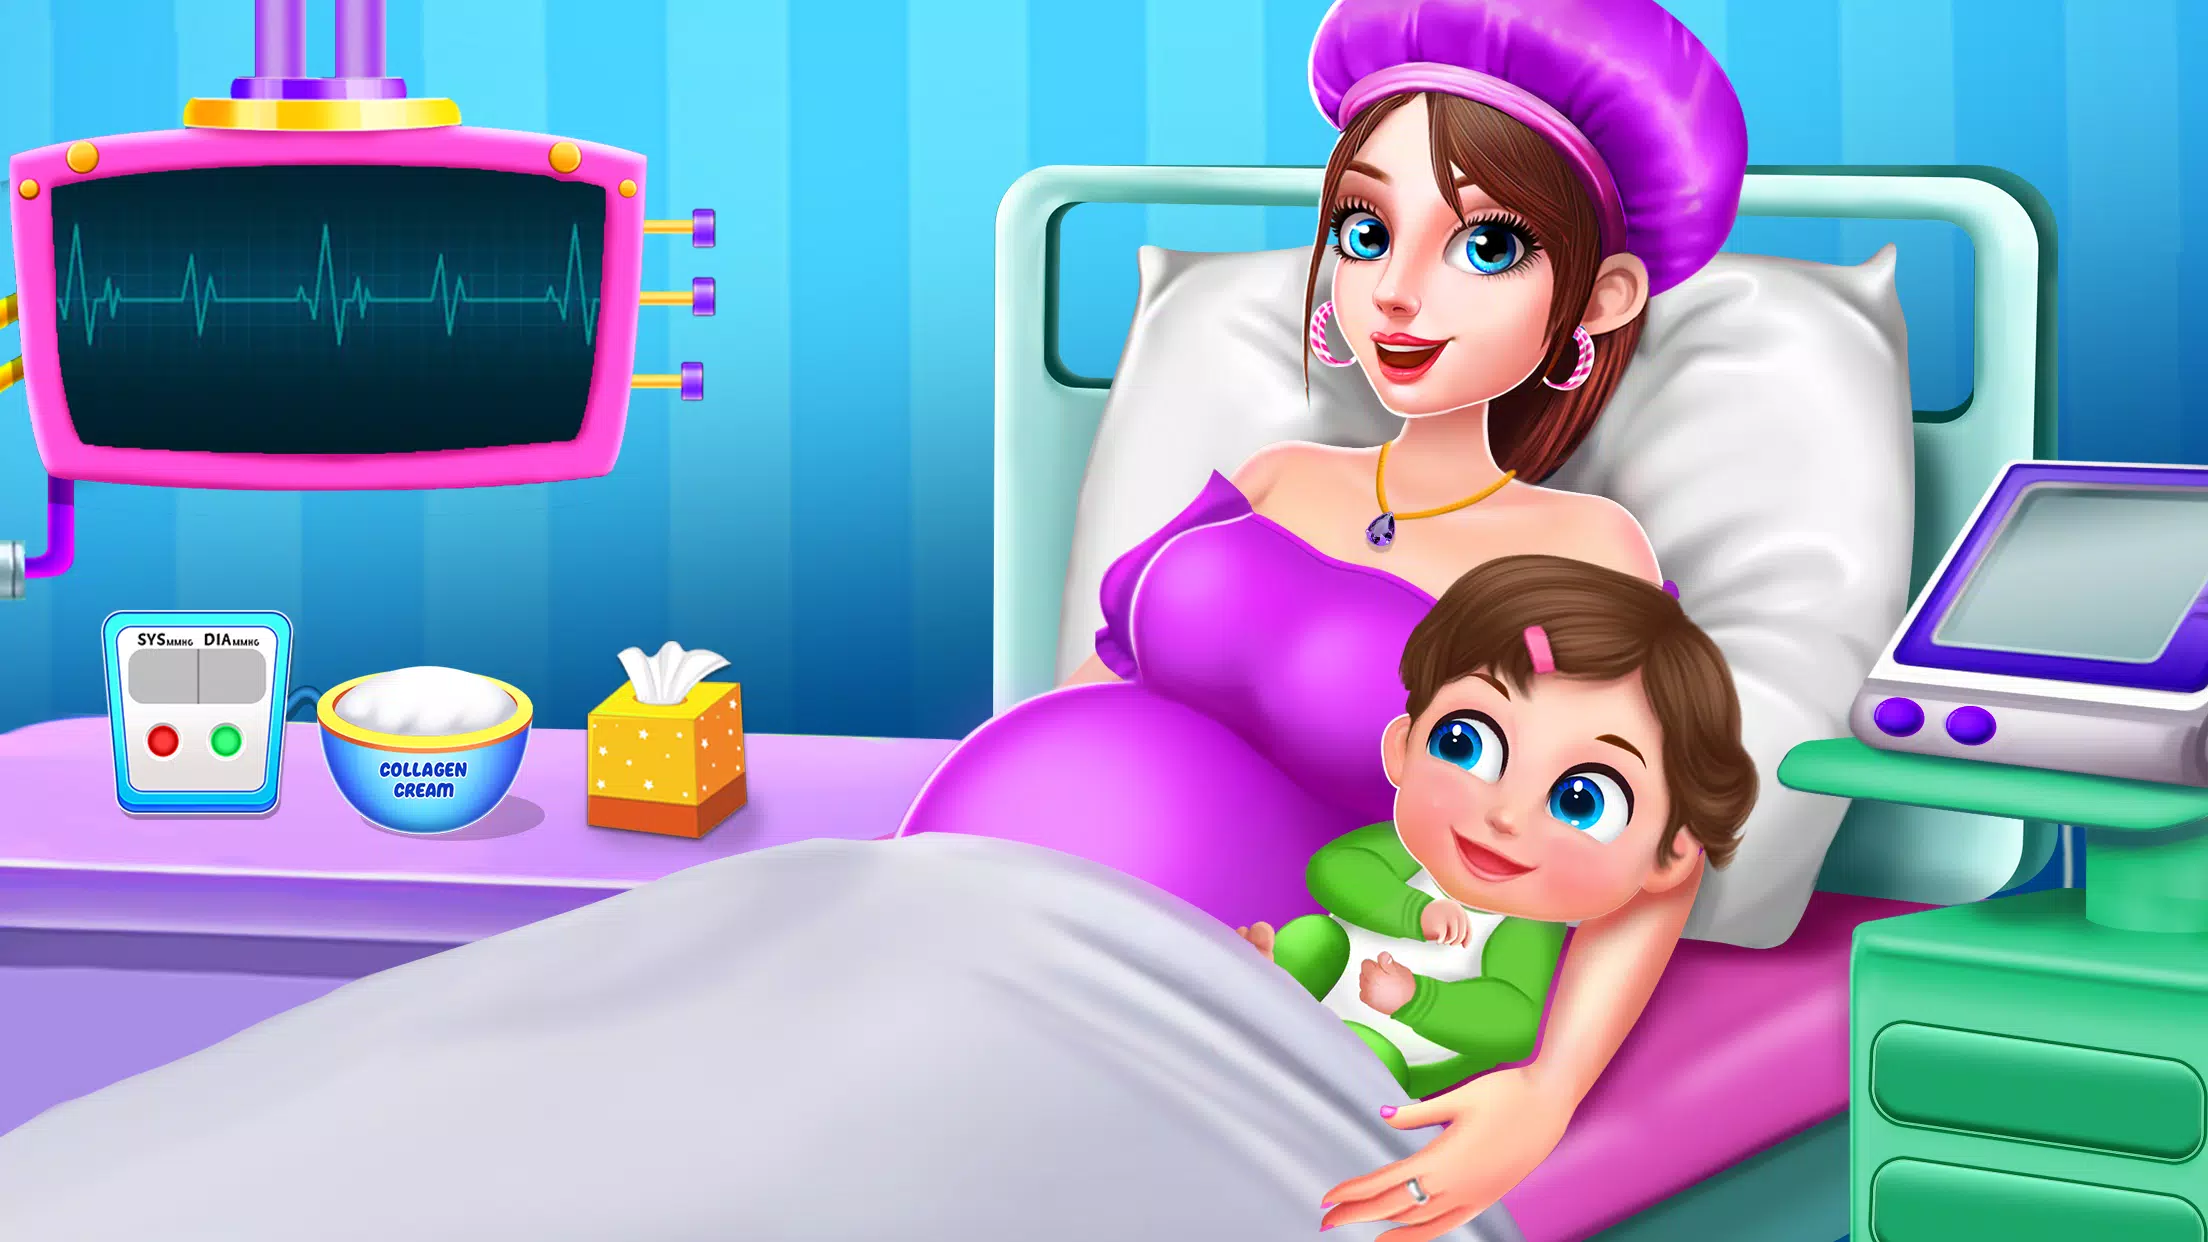 Mommy And Baby Game-Girls Game APK for Android Download